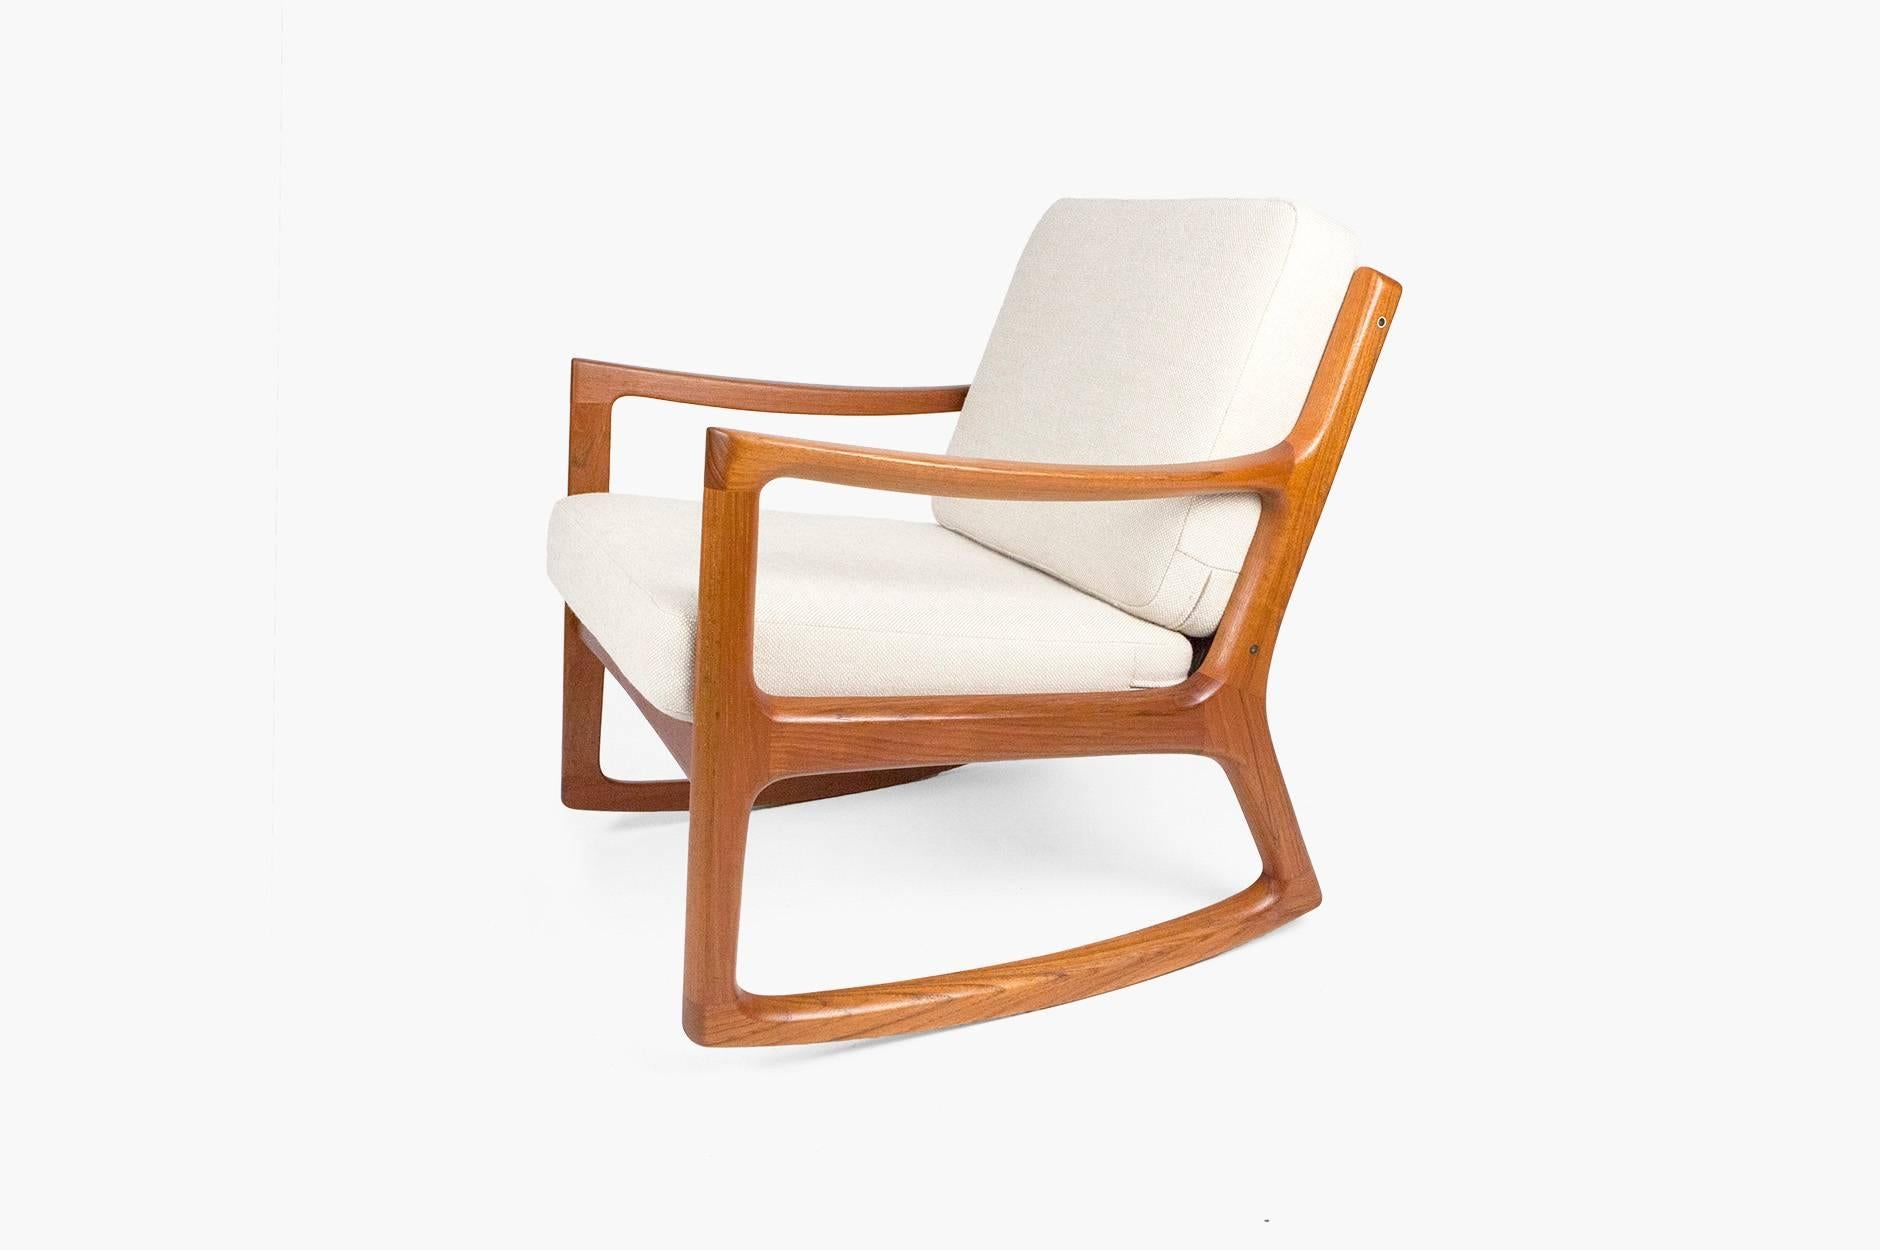 Solid teak rocking chair produced by France & Son, circa 1960, Denmark. Includes maker's badge. New cushions covered in Kvadrat Hallingdal No. 200 woven wool fabric.